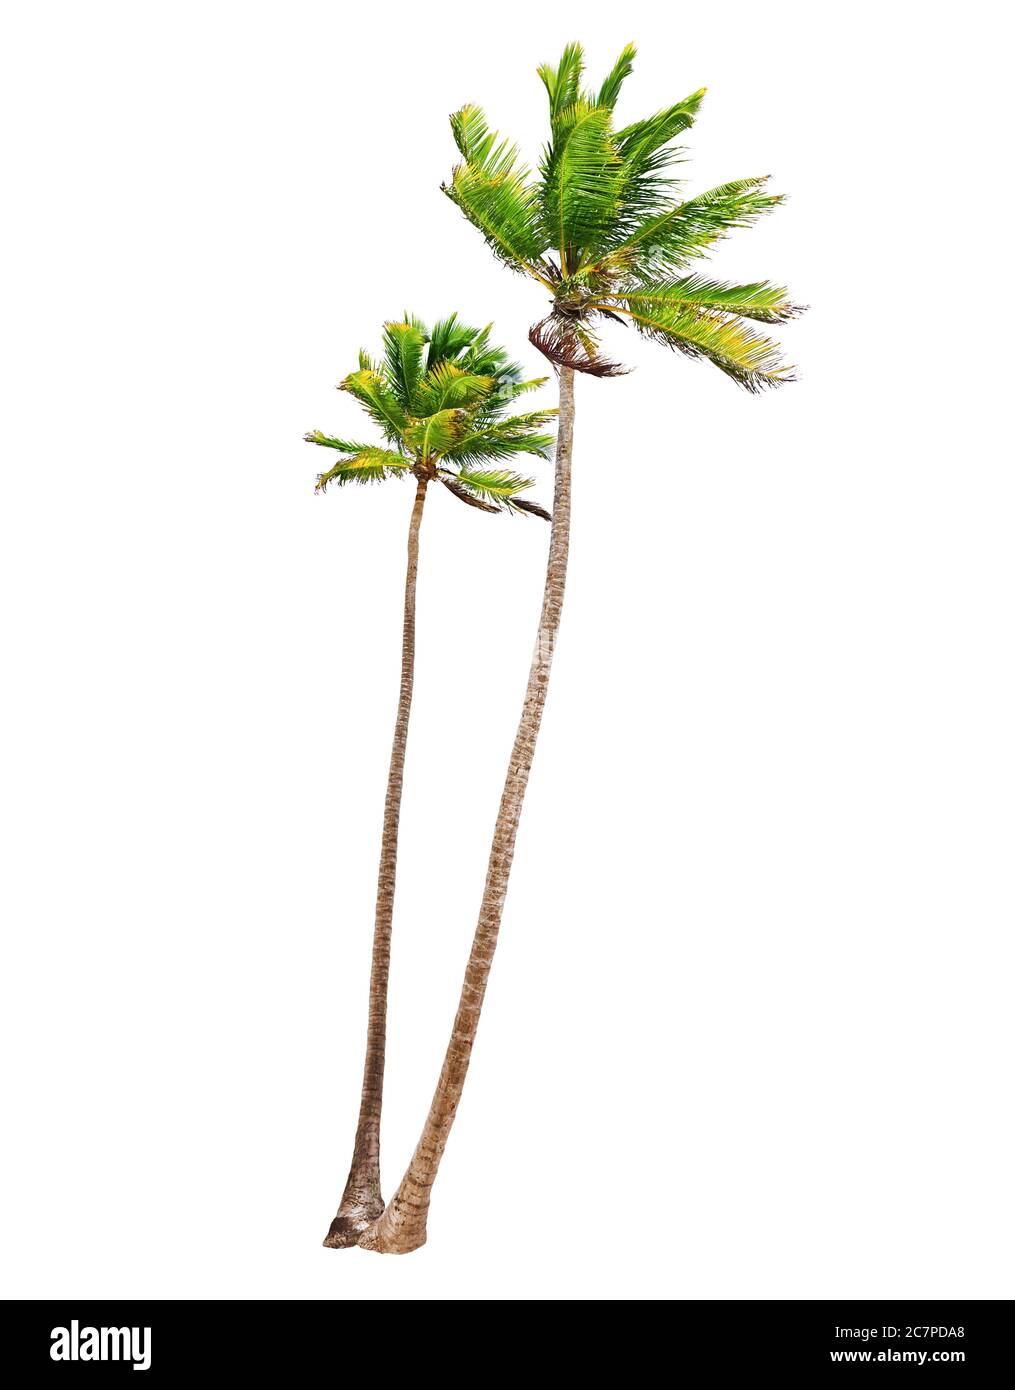 Coconut palm trees isolated on a white background Stock Photo